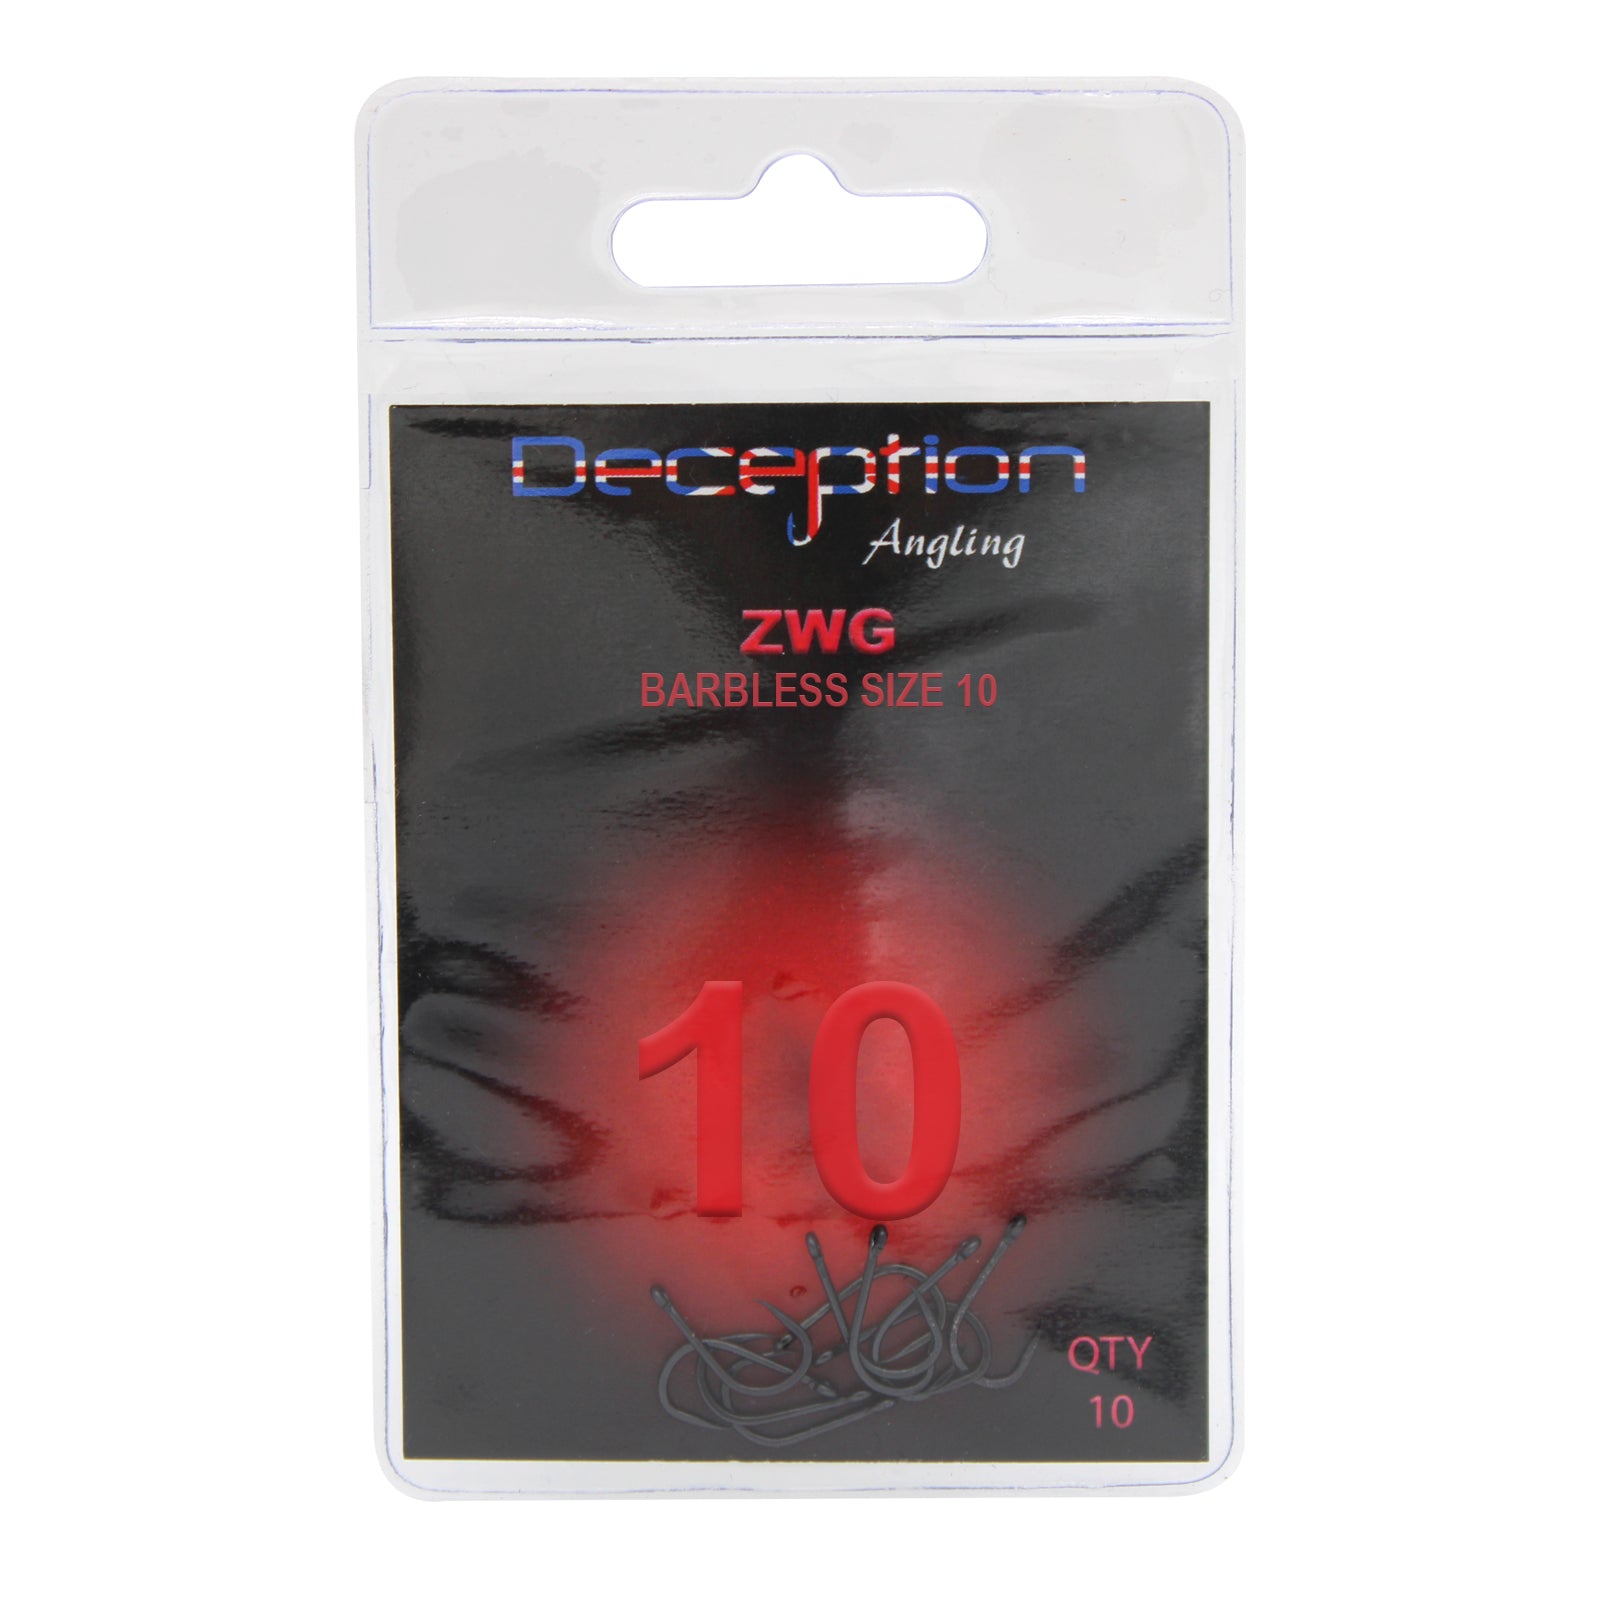 Deception Angling ZWG Barbless Fishing Hooks Size 10 Pack of 10